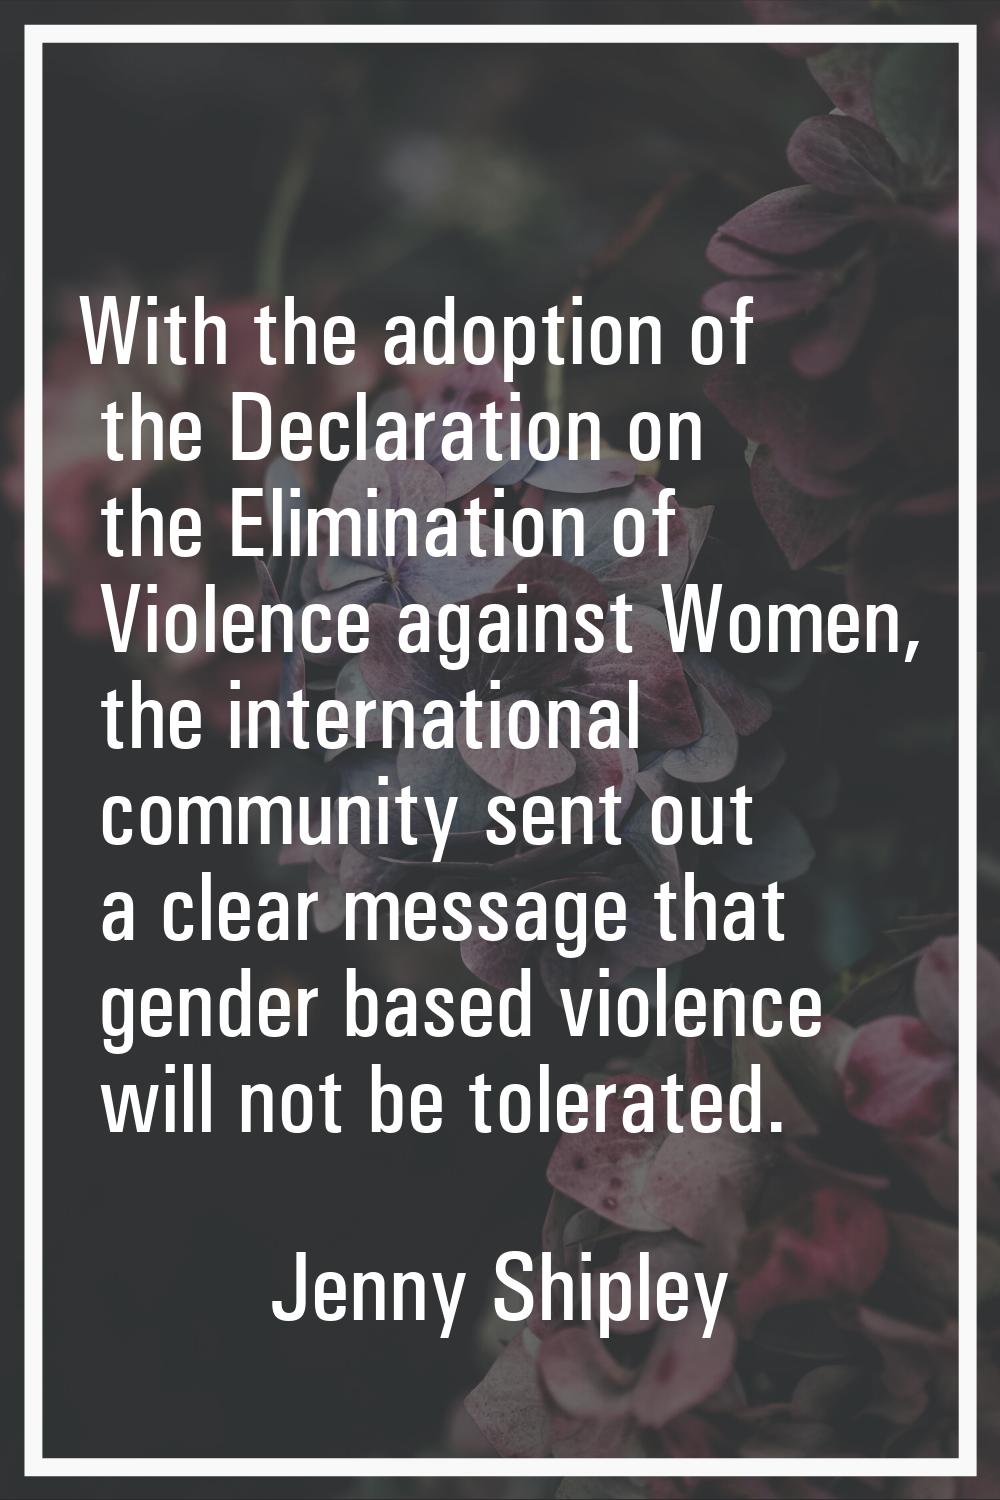 With the adoption of the Declaration on the Elimination of Violence against Women, the internationa